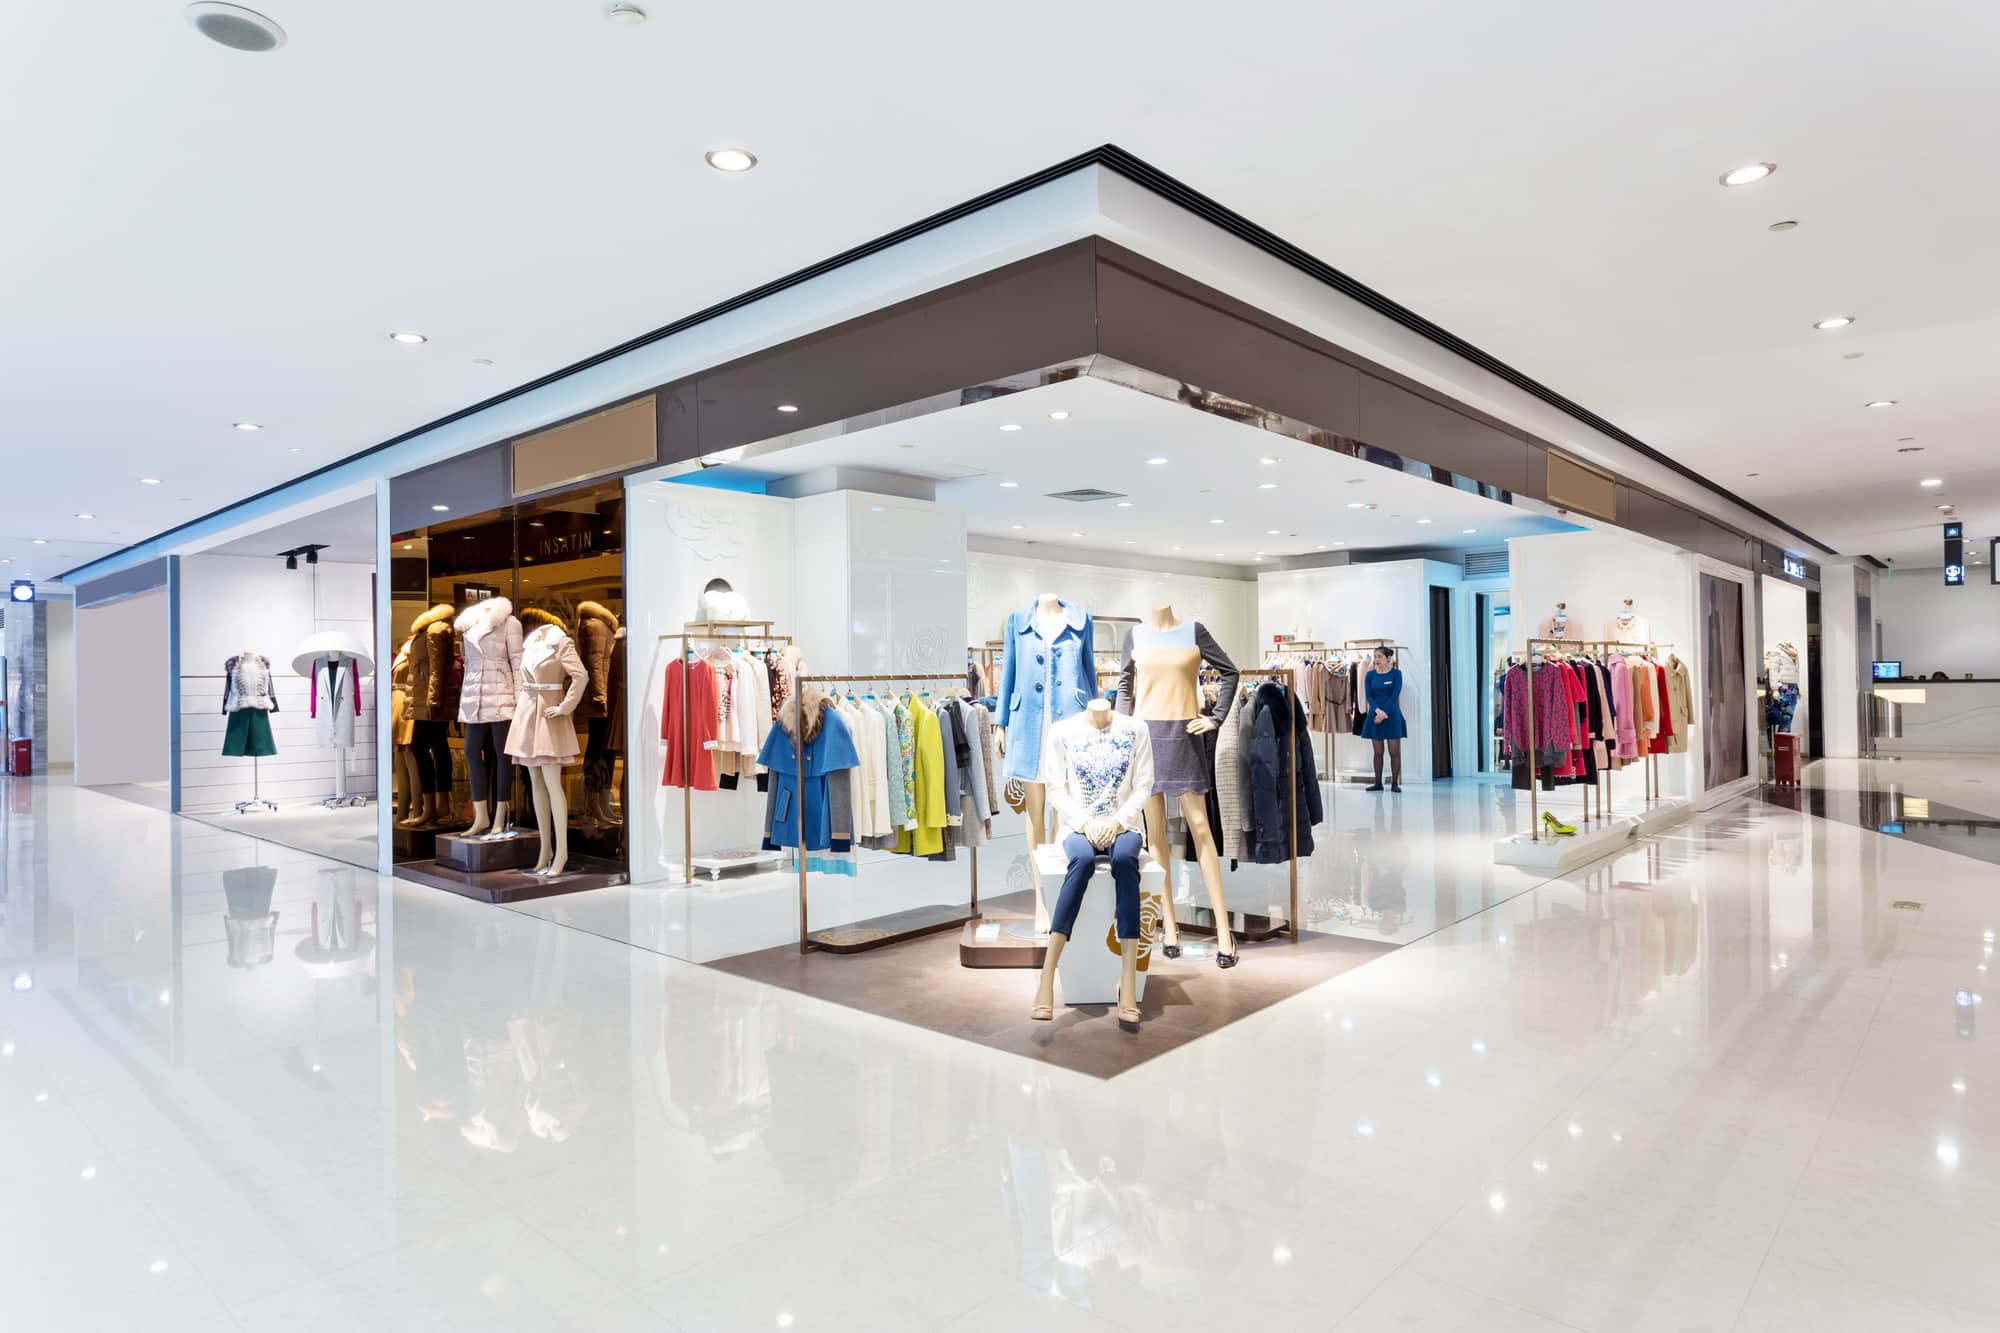 Light Up Your Shopping Centre Project: The Ultimate Guide to Choosing the Best LED Lighting Supplier